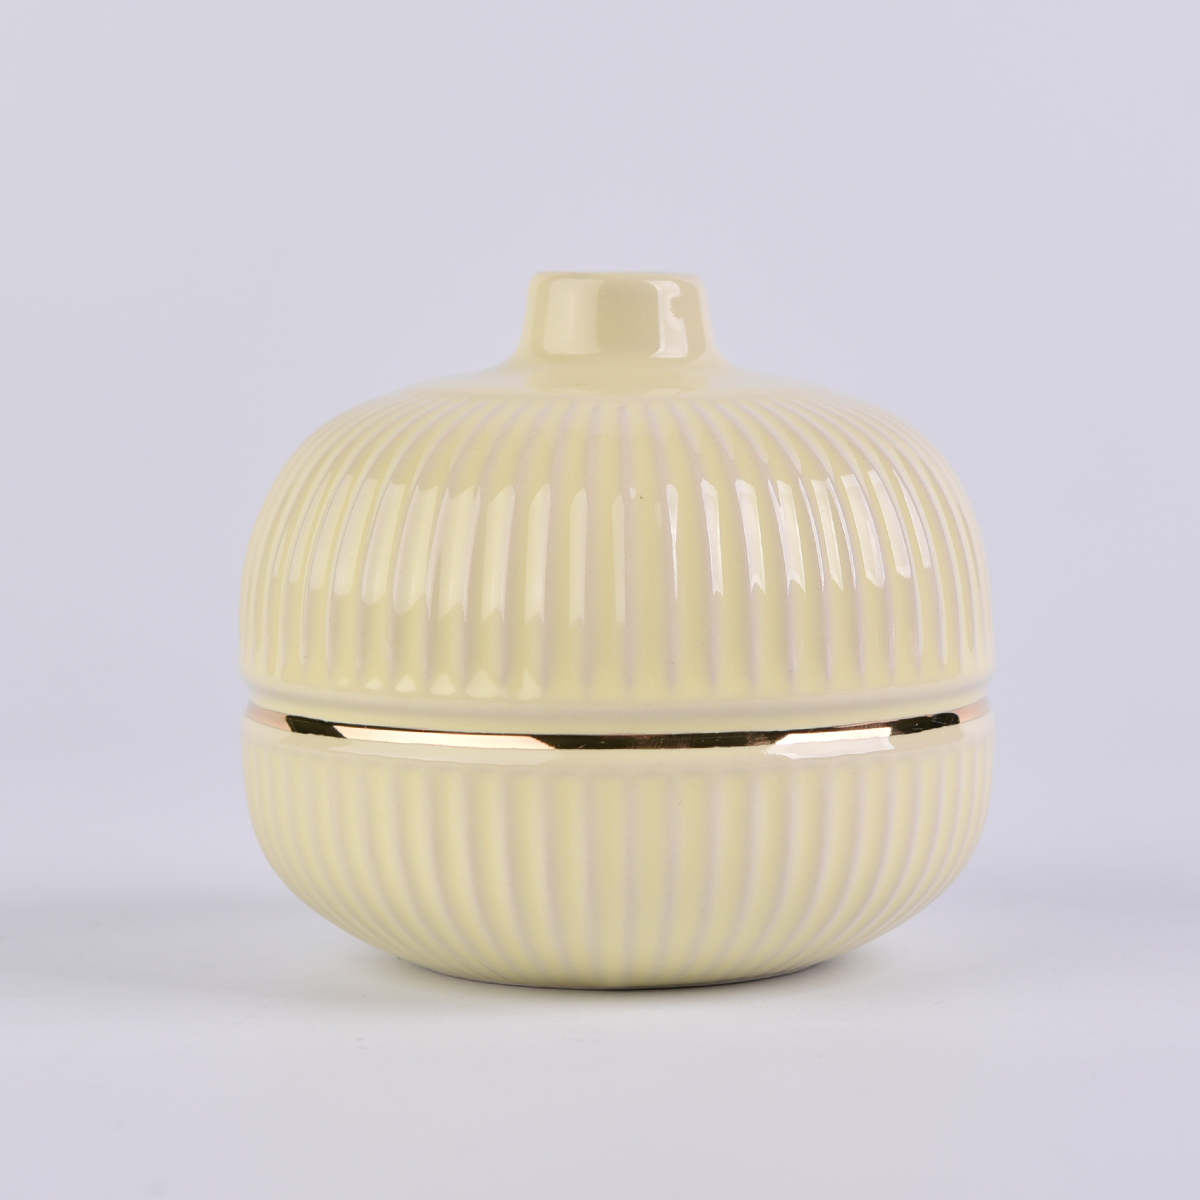 bright yellow ceramic bottle with gold ring, decorative ceramic diffuser bottles for home